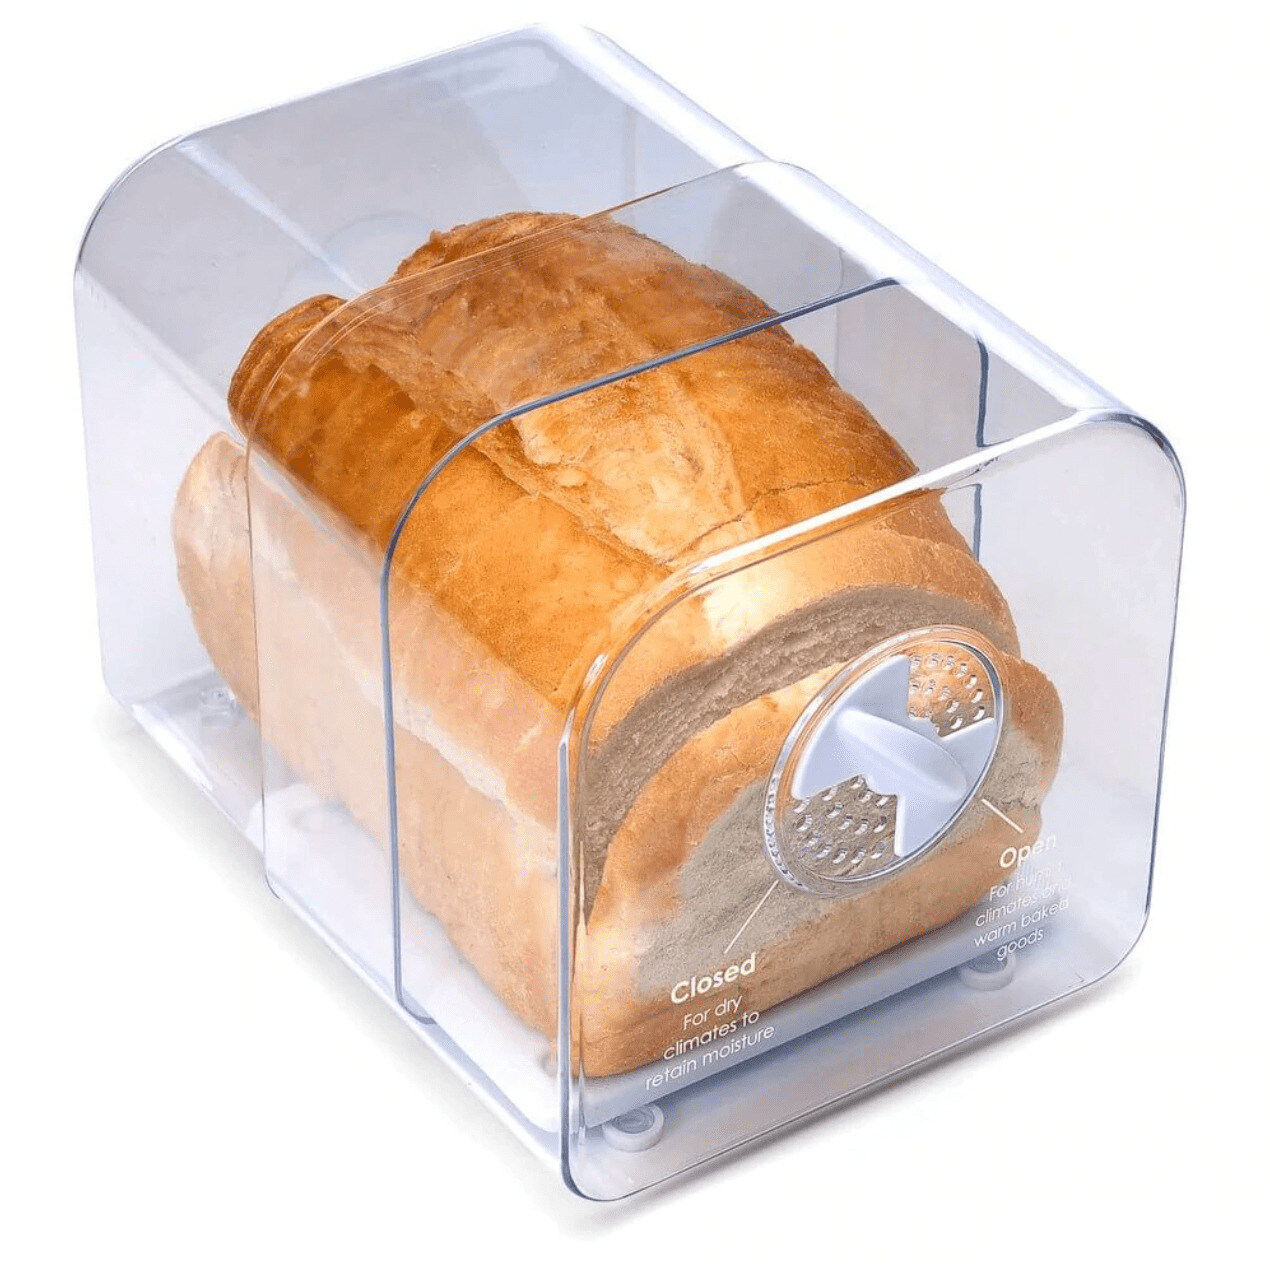 How To Store Loaf Of Bread